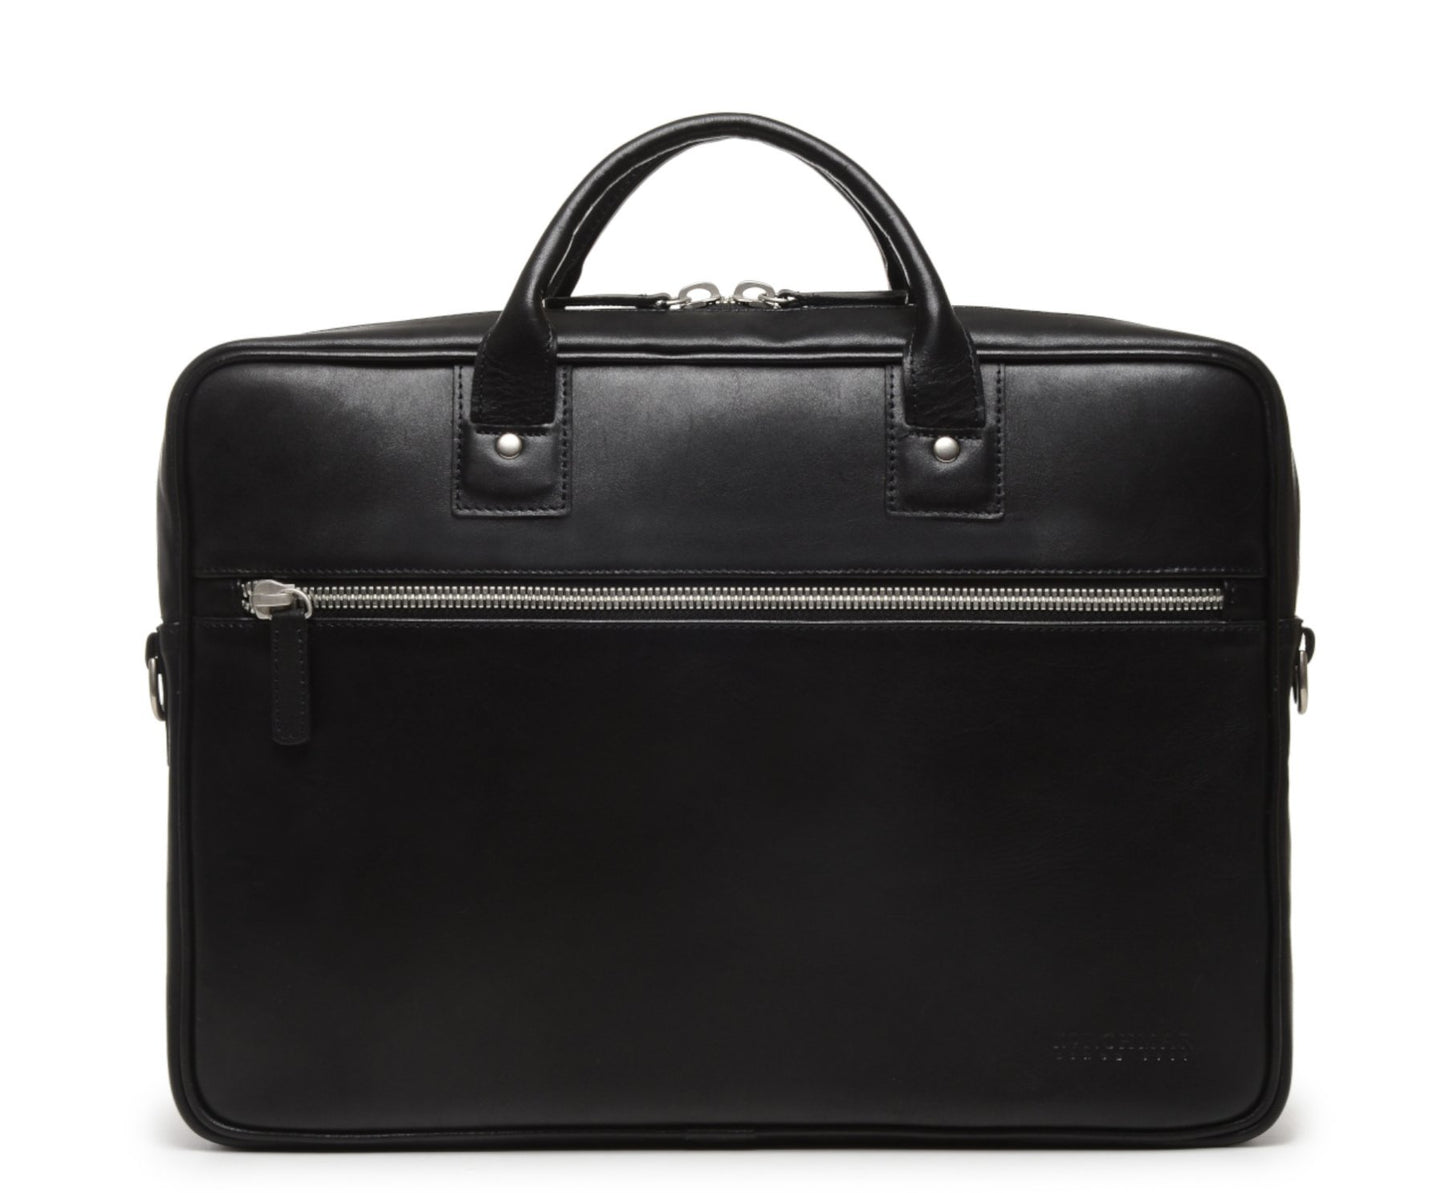 DYLAN Leather 15" Brief Bag | Grain Leather | Made in USA | Korchmar | Black Leather with Nickel Fittings